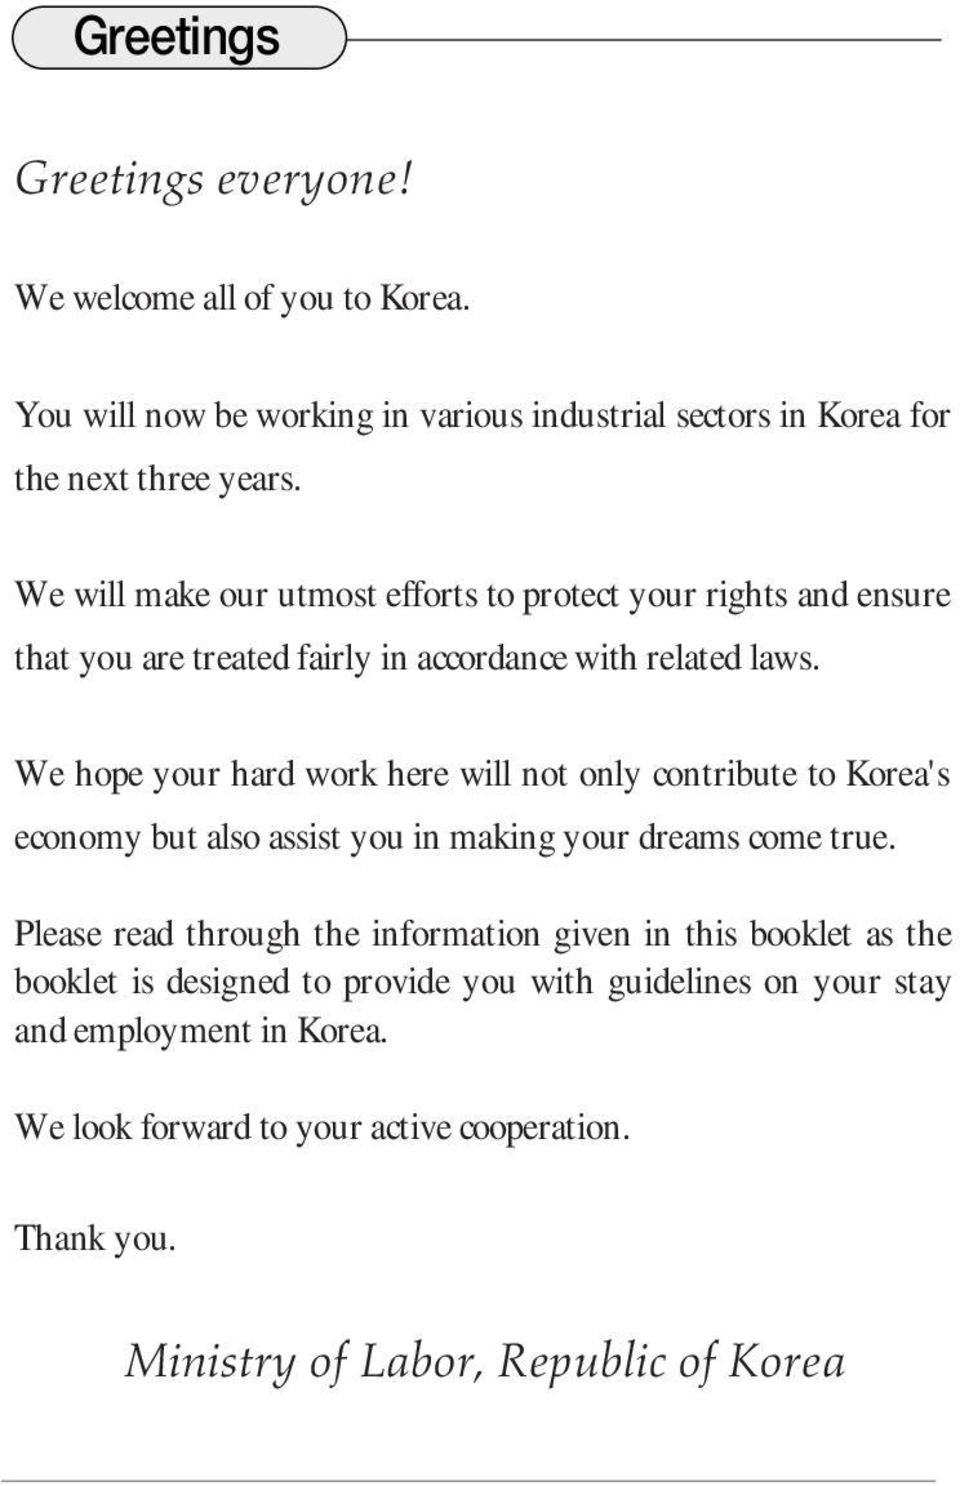 We hope your hard work here will not only contribute to Korea's economy but also assist you in making your dreams come true.